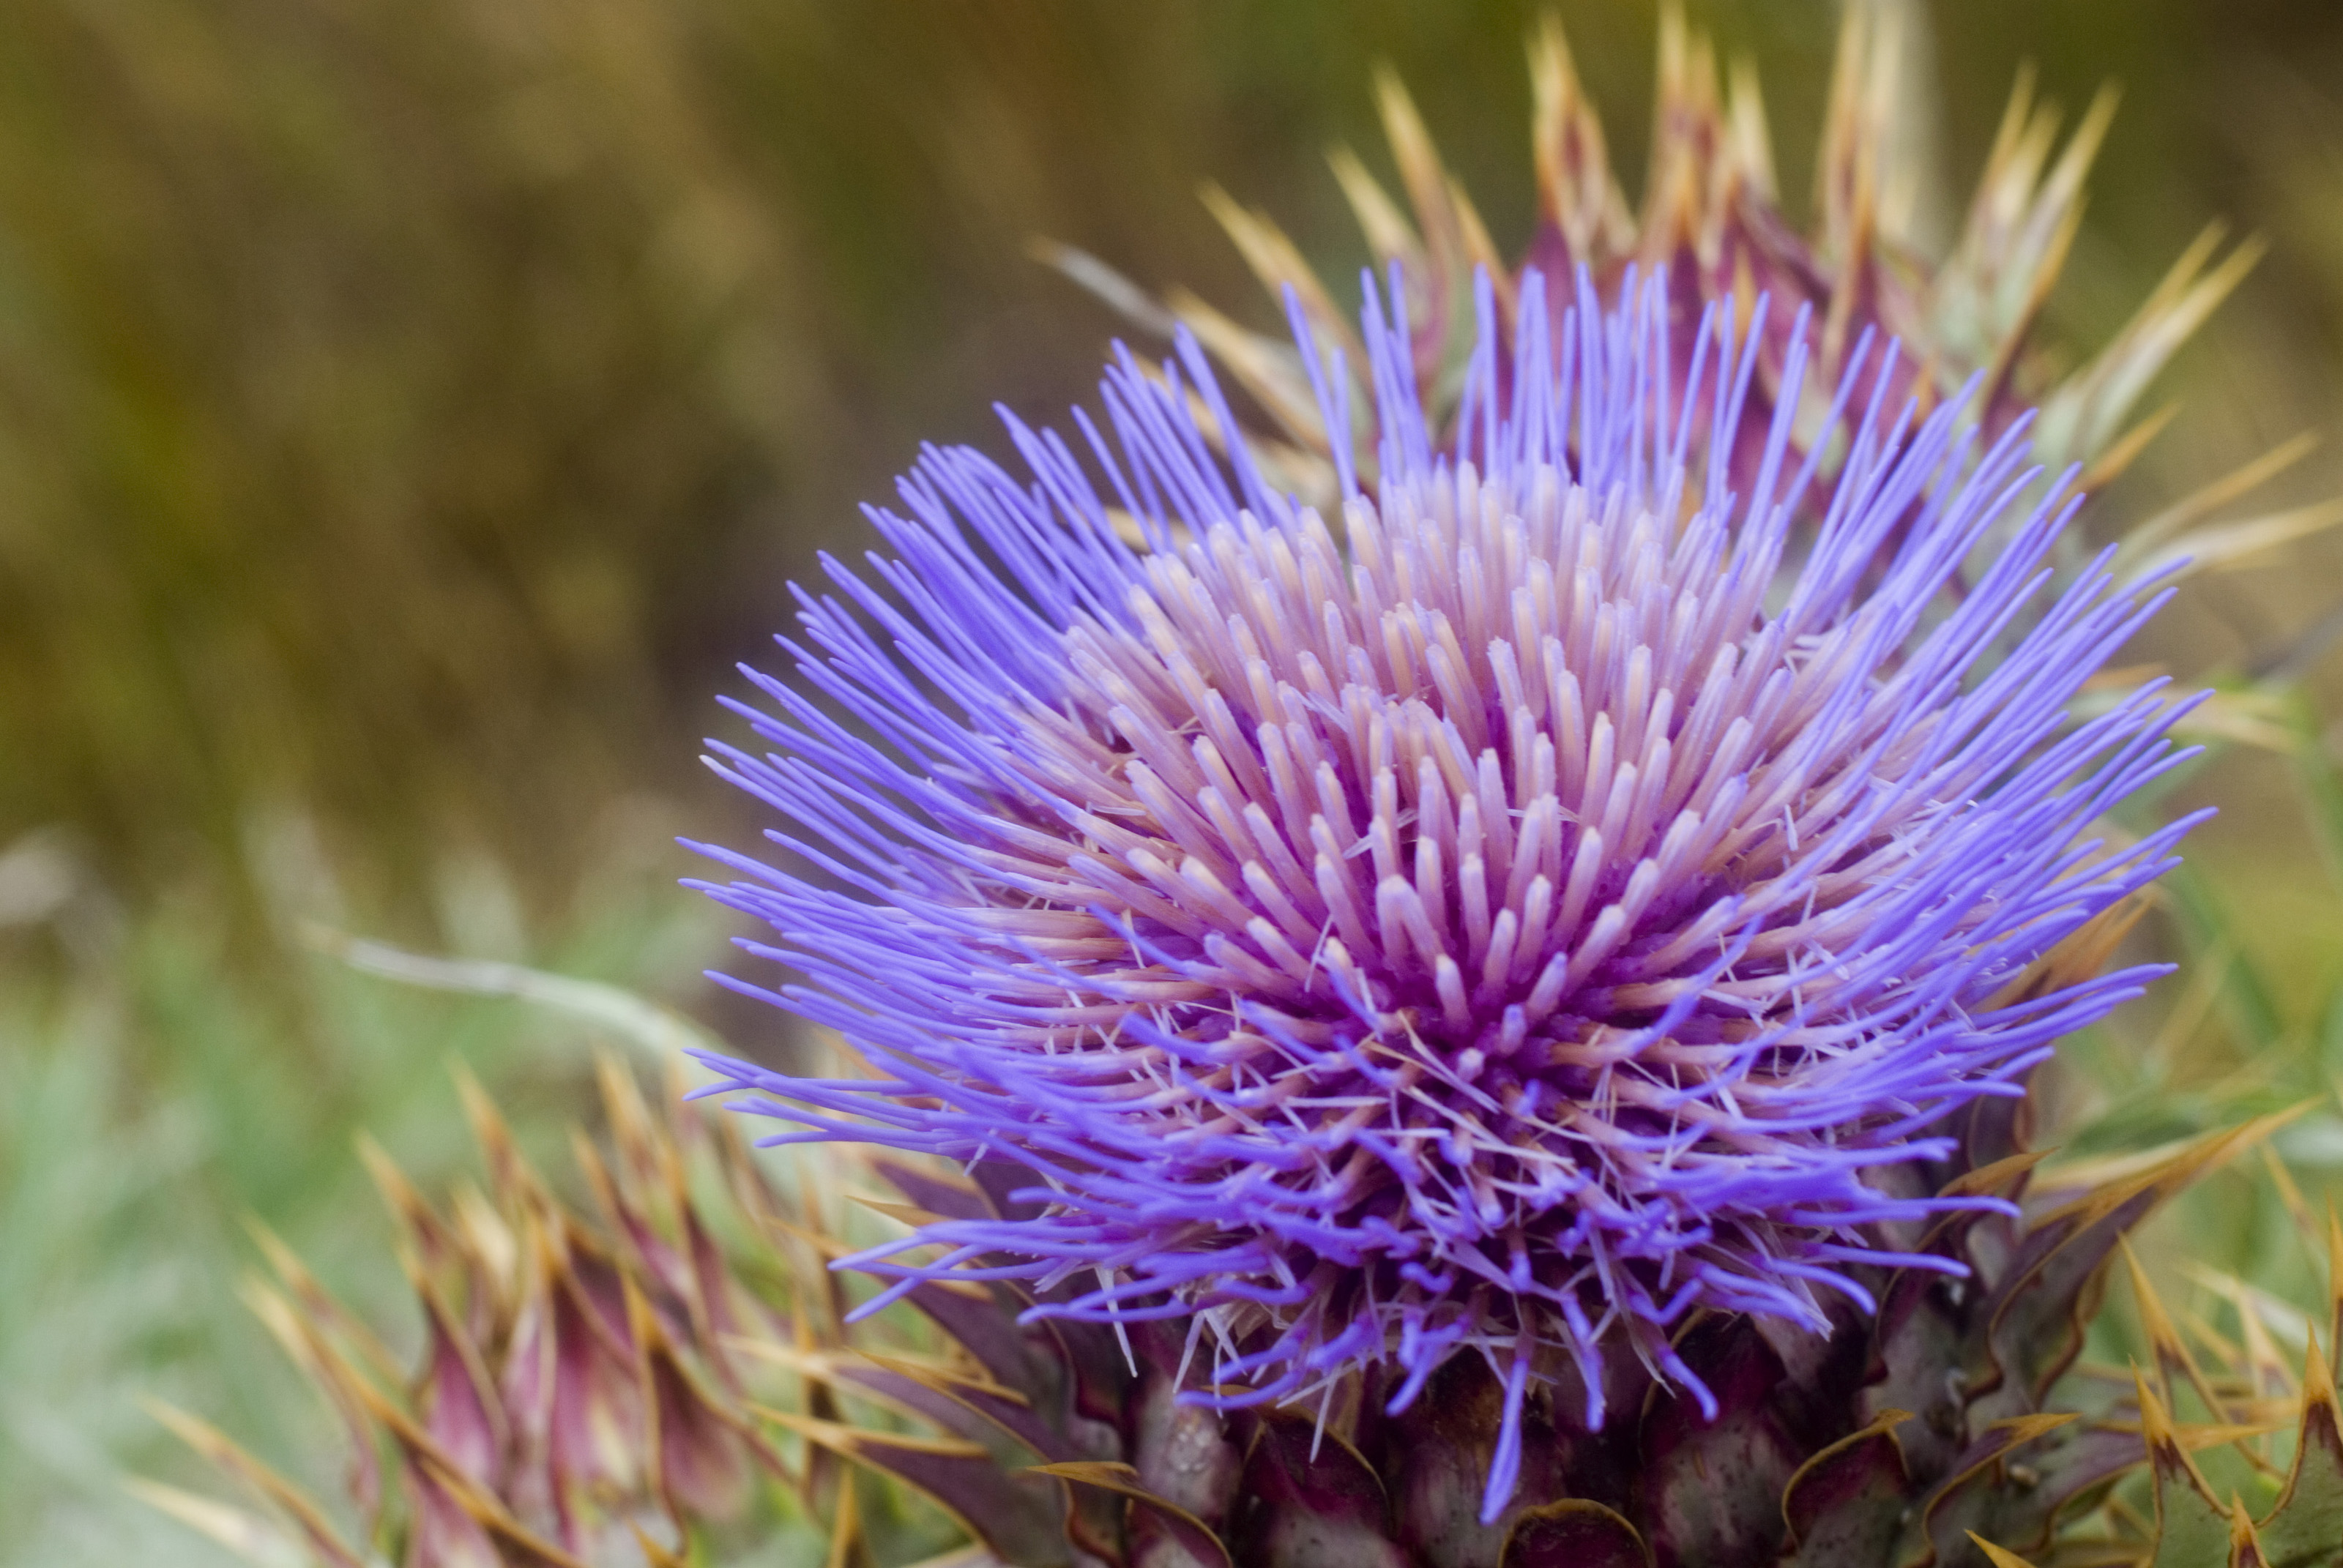 Close Up of Purple Thistle Flower-8932 | Stockarch Free Stock Photos